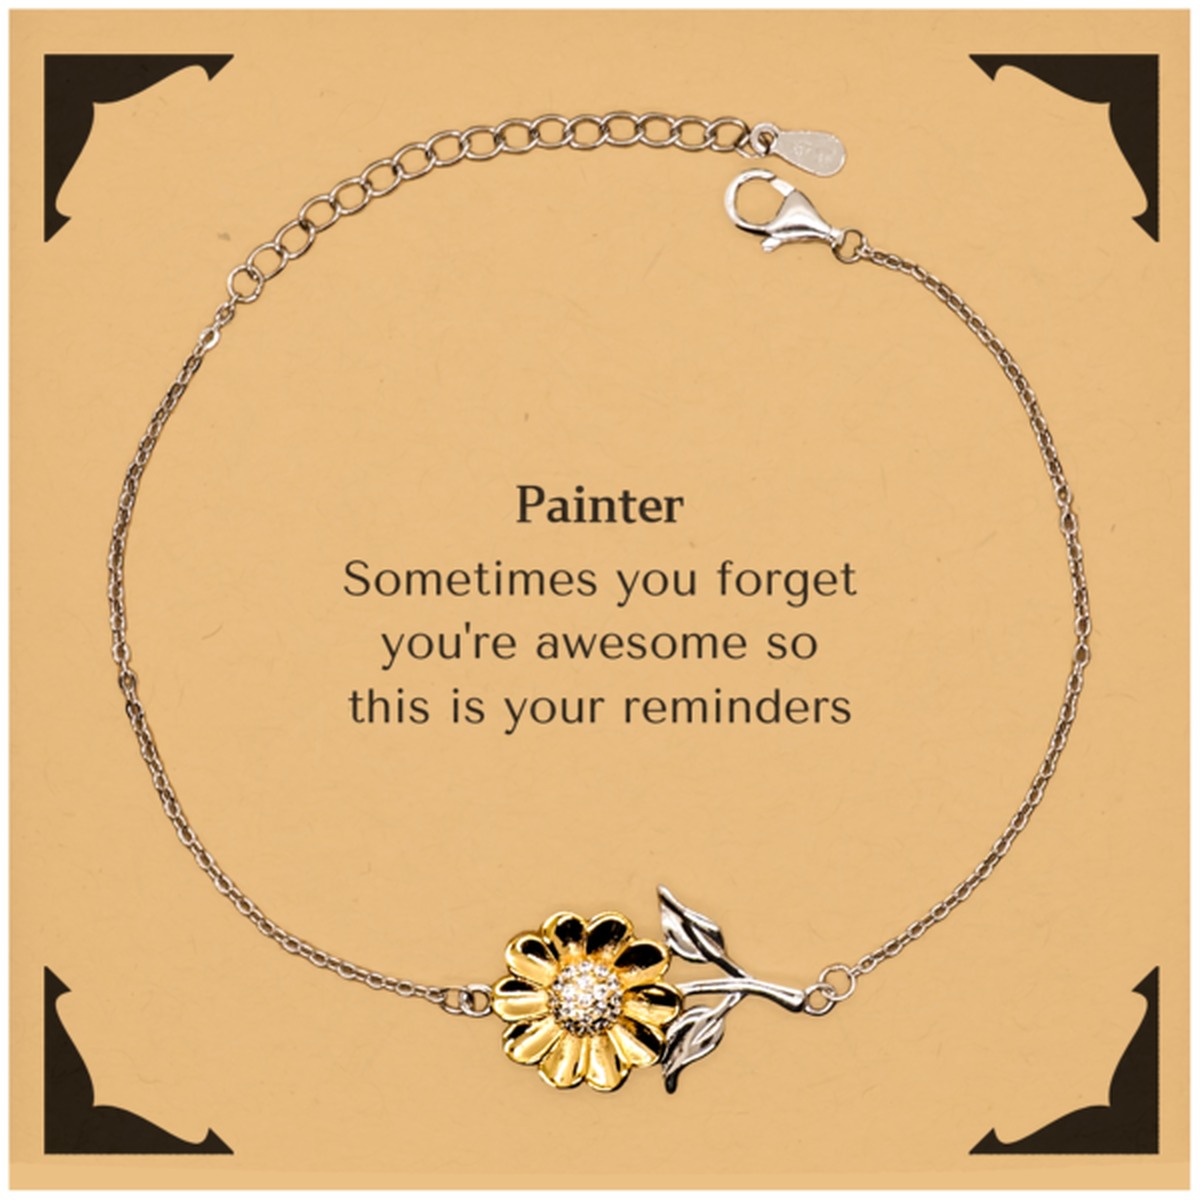 Sentimental Painter Sunflower Bracelet, Painter Sometimes you forget you're awesome so this is your reminders, Graduation Christmas Birthday Gifts for Painter, Men, Women, Coworkers